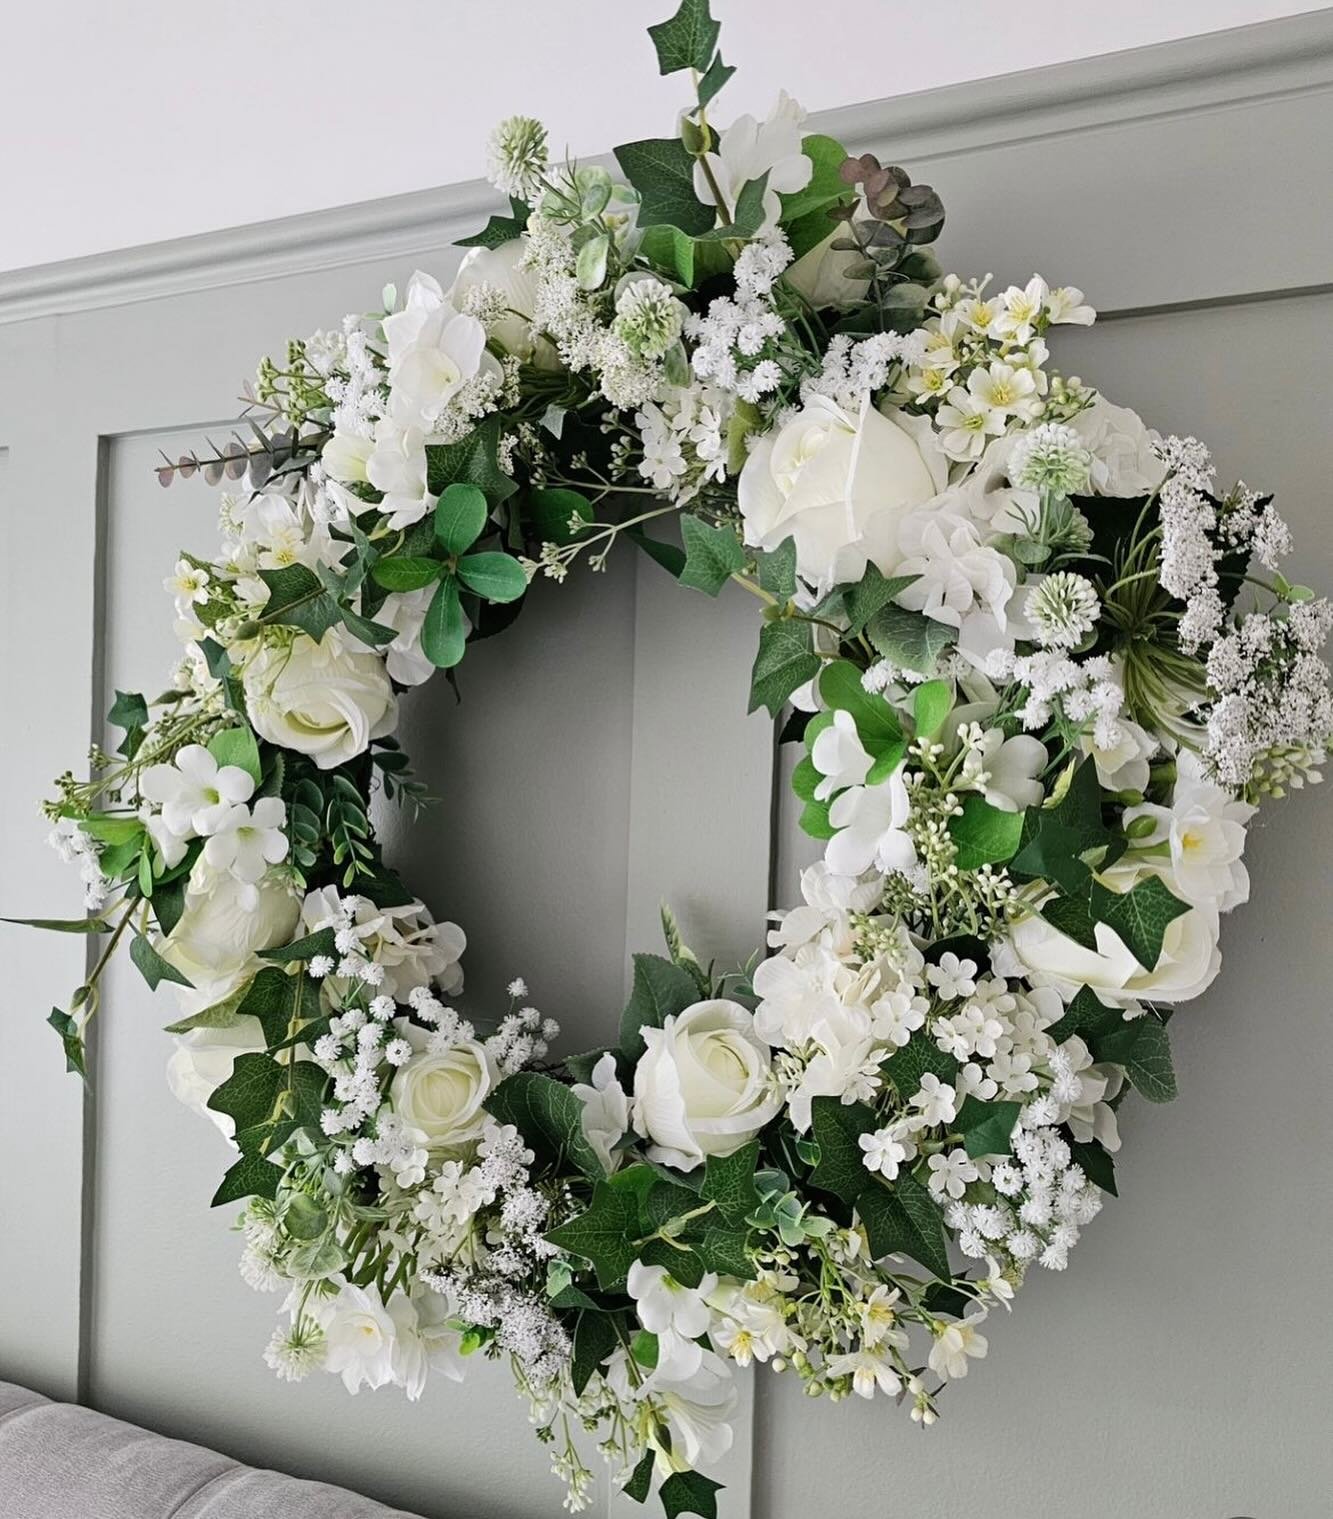 Shades of summer white with a little added jasmine foliage. Perfect for inside and out. This is 60cm but also available in 40cm. Remember to use WELCOME10 for 10% off xx #summer #summervibes #roses🌹 #whiteflowers